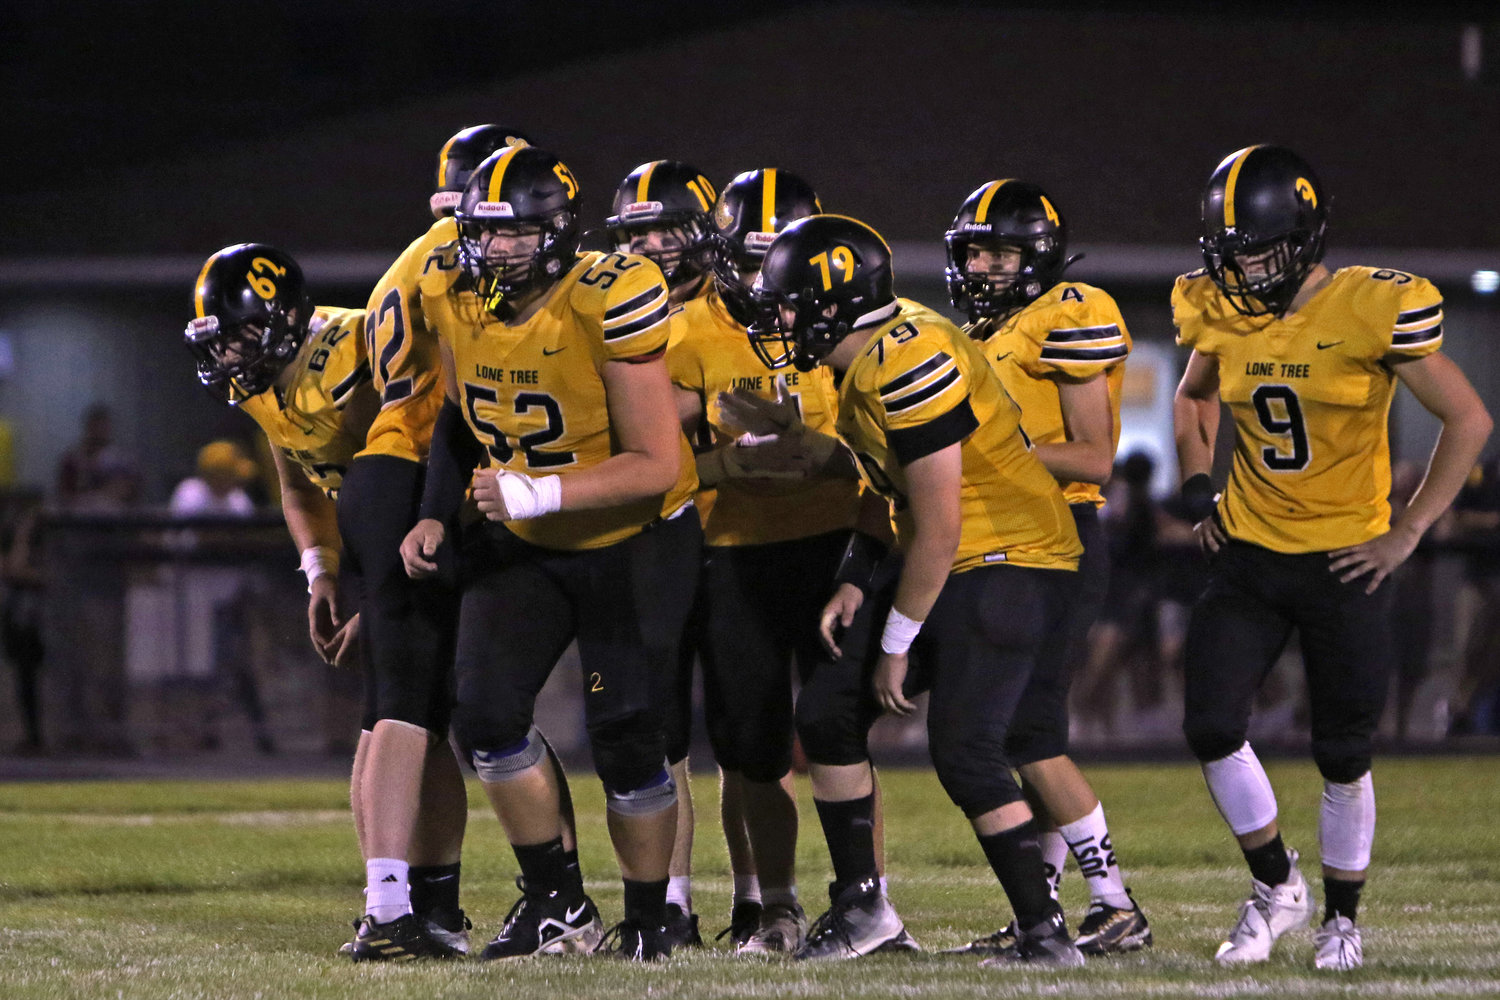 The Lone Tree offense prepares for the next snap during a 49-24 win over English Valleys.